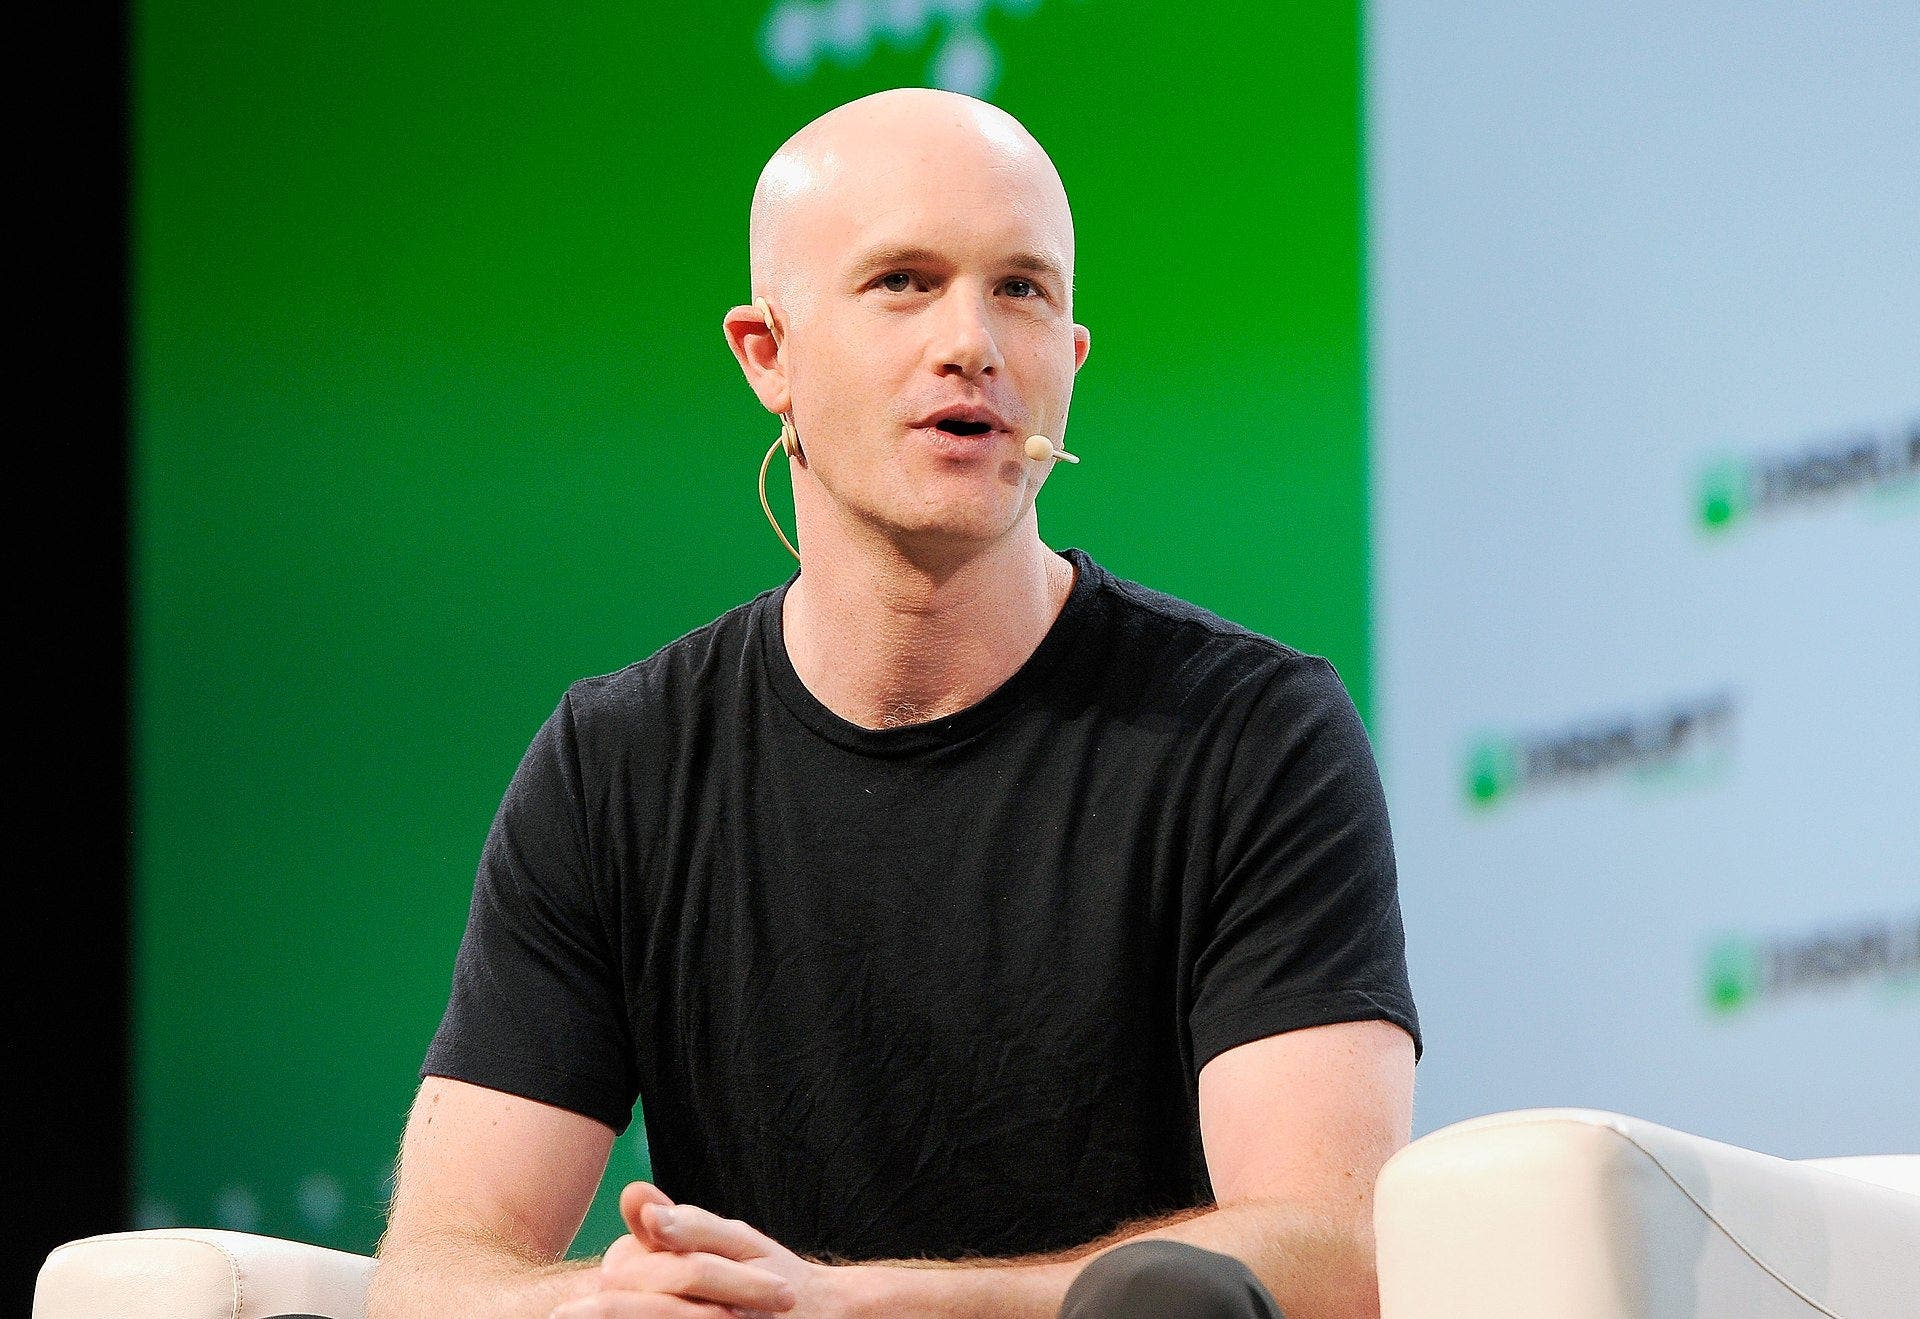 Coinbase's Brian Armstrong Lays Out Ideas For Clearer Crypto Regulation: 'Stablecoin Issuers, Exchanges, Greatest Source Of Consumer Risk'